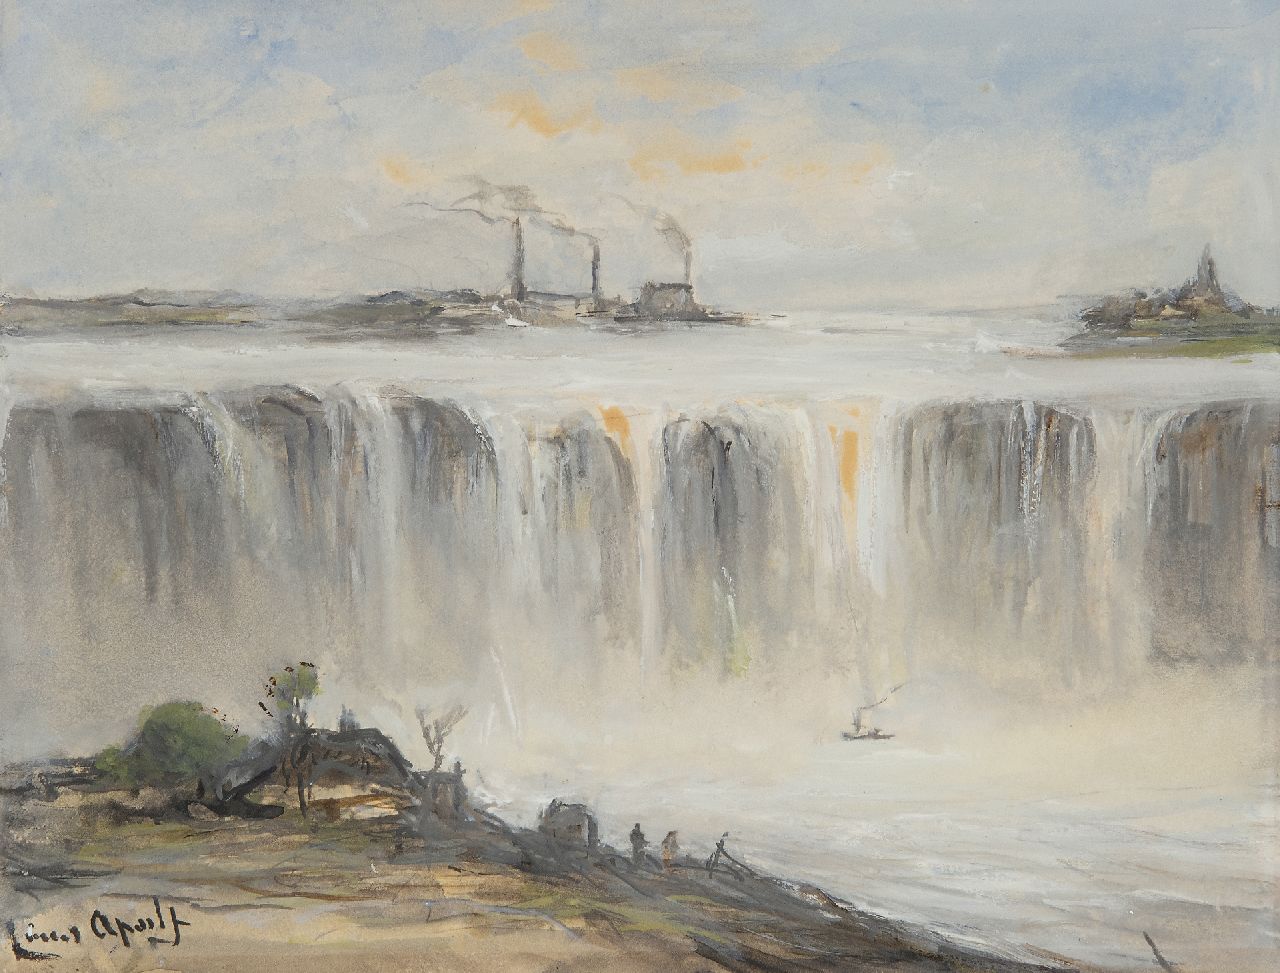 Apol L.F.H.  | Lodewijk Franciscus Hendrik 'Louis' Apol | Watercolours and drawings offered for sale | The Niagara falls, watercolour and gouache on paper 15.0 x 19.8 cm, signed l.l. and dated 1895 on the reverse